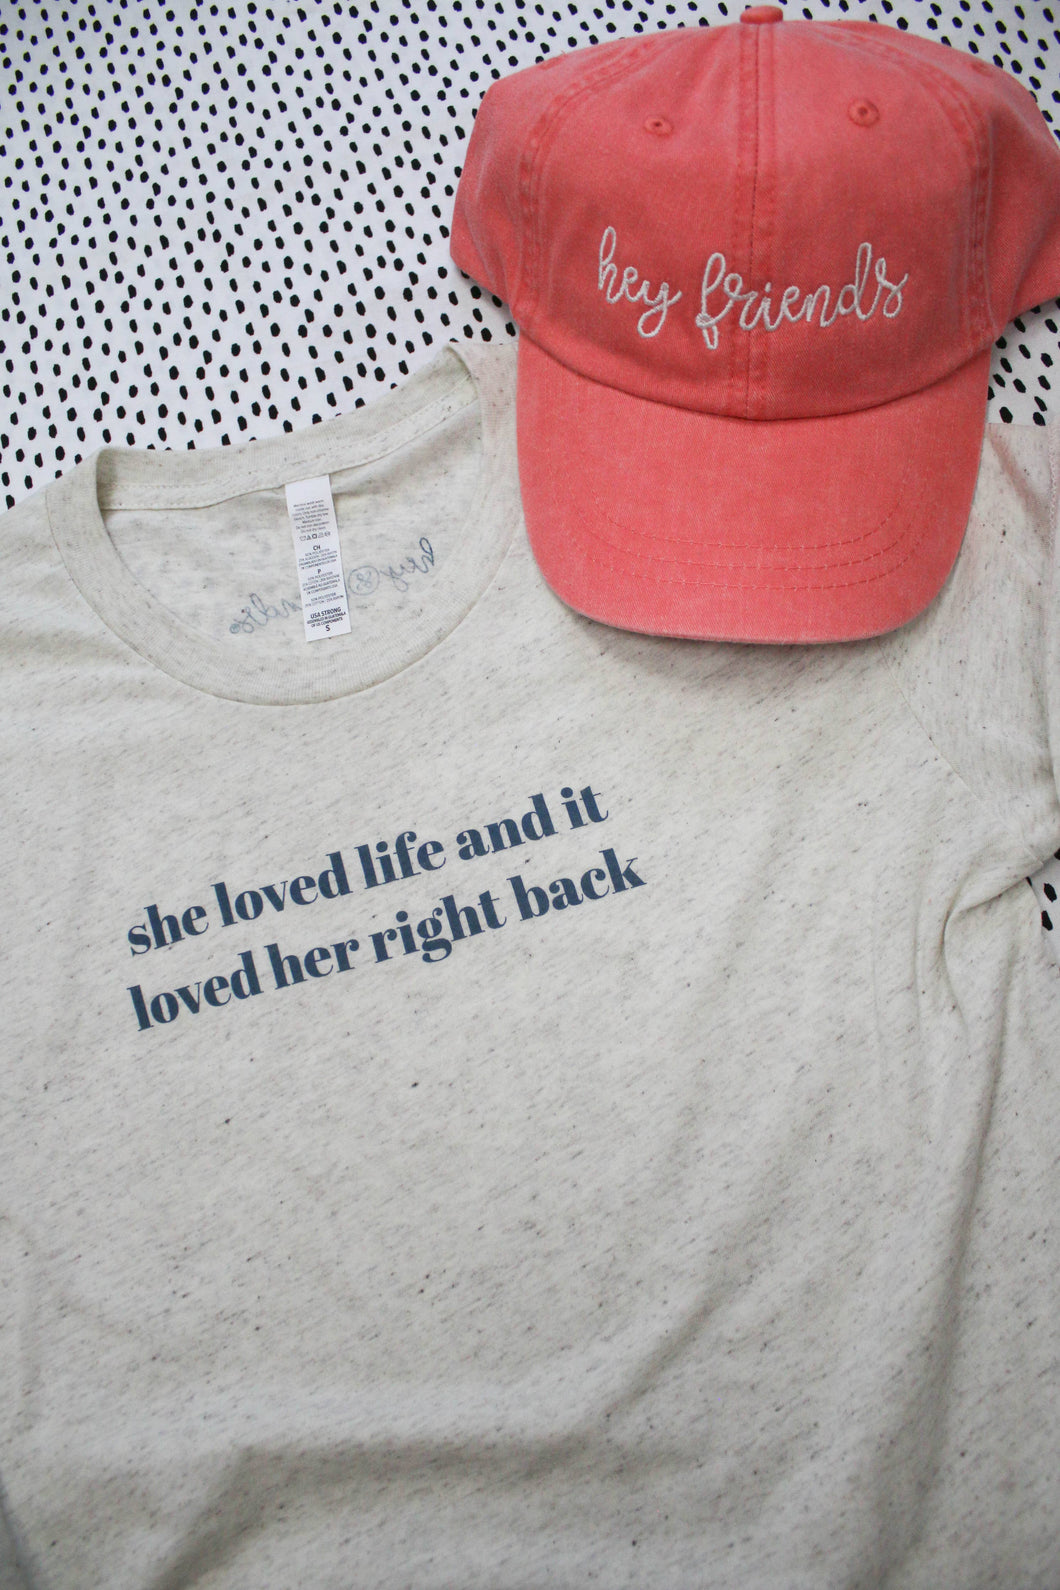 She Loved Life and it Loved Her Right Back Shirt